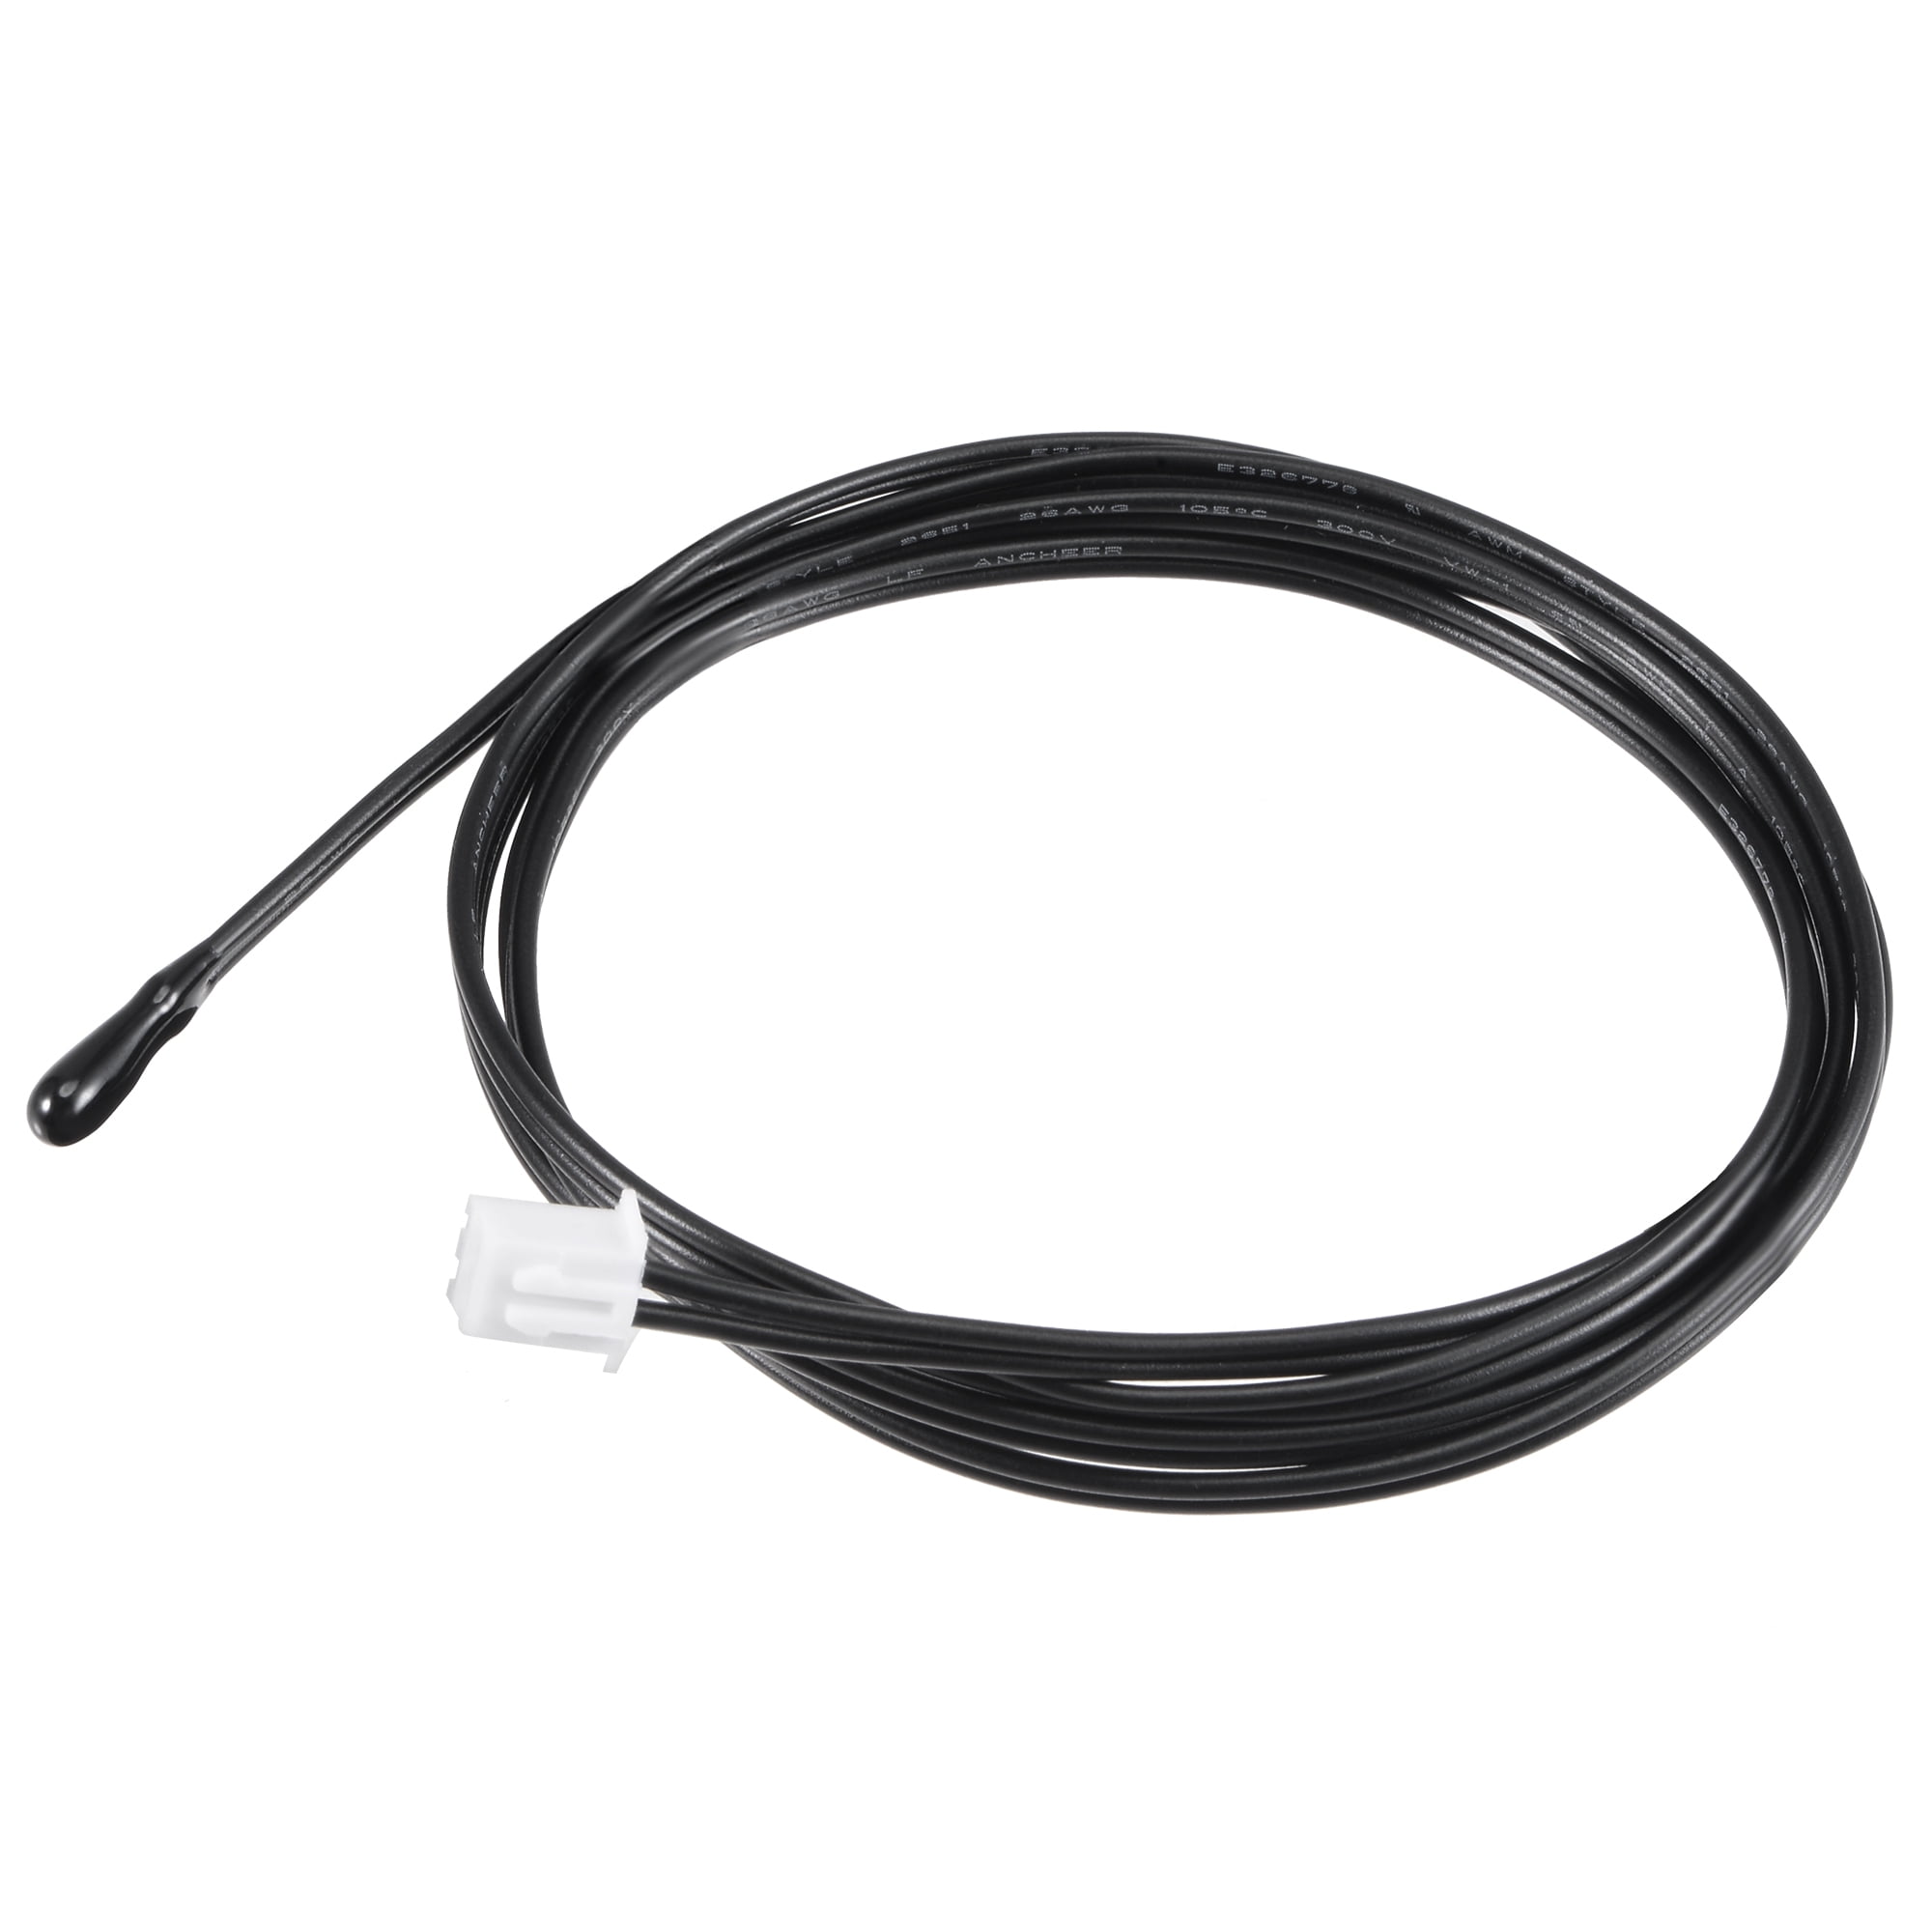 Details about   5K NTC Temperature Sensor Probe 3.3ft Digital Thermometer Extension Cable 